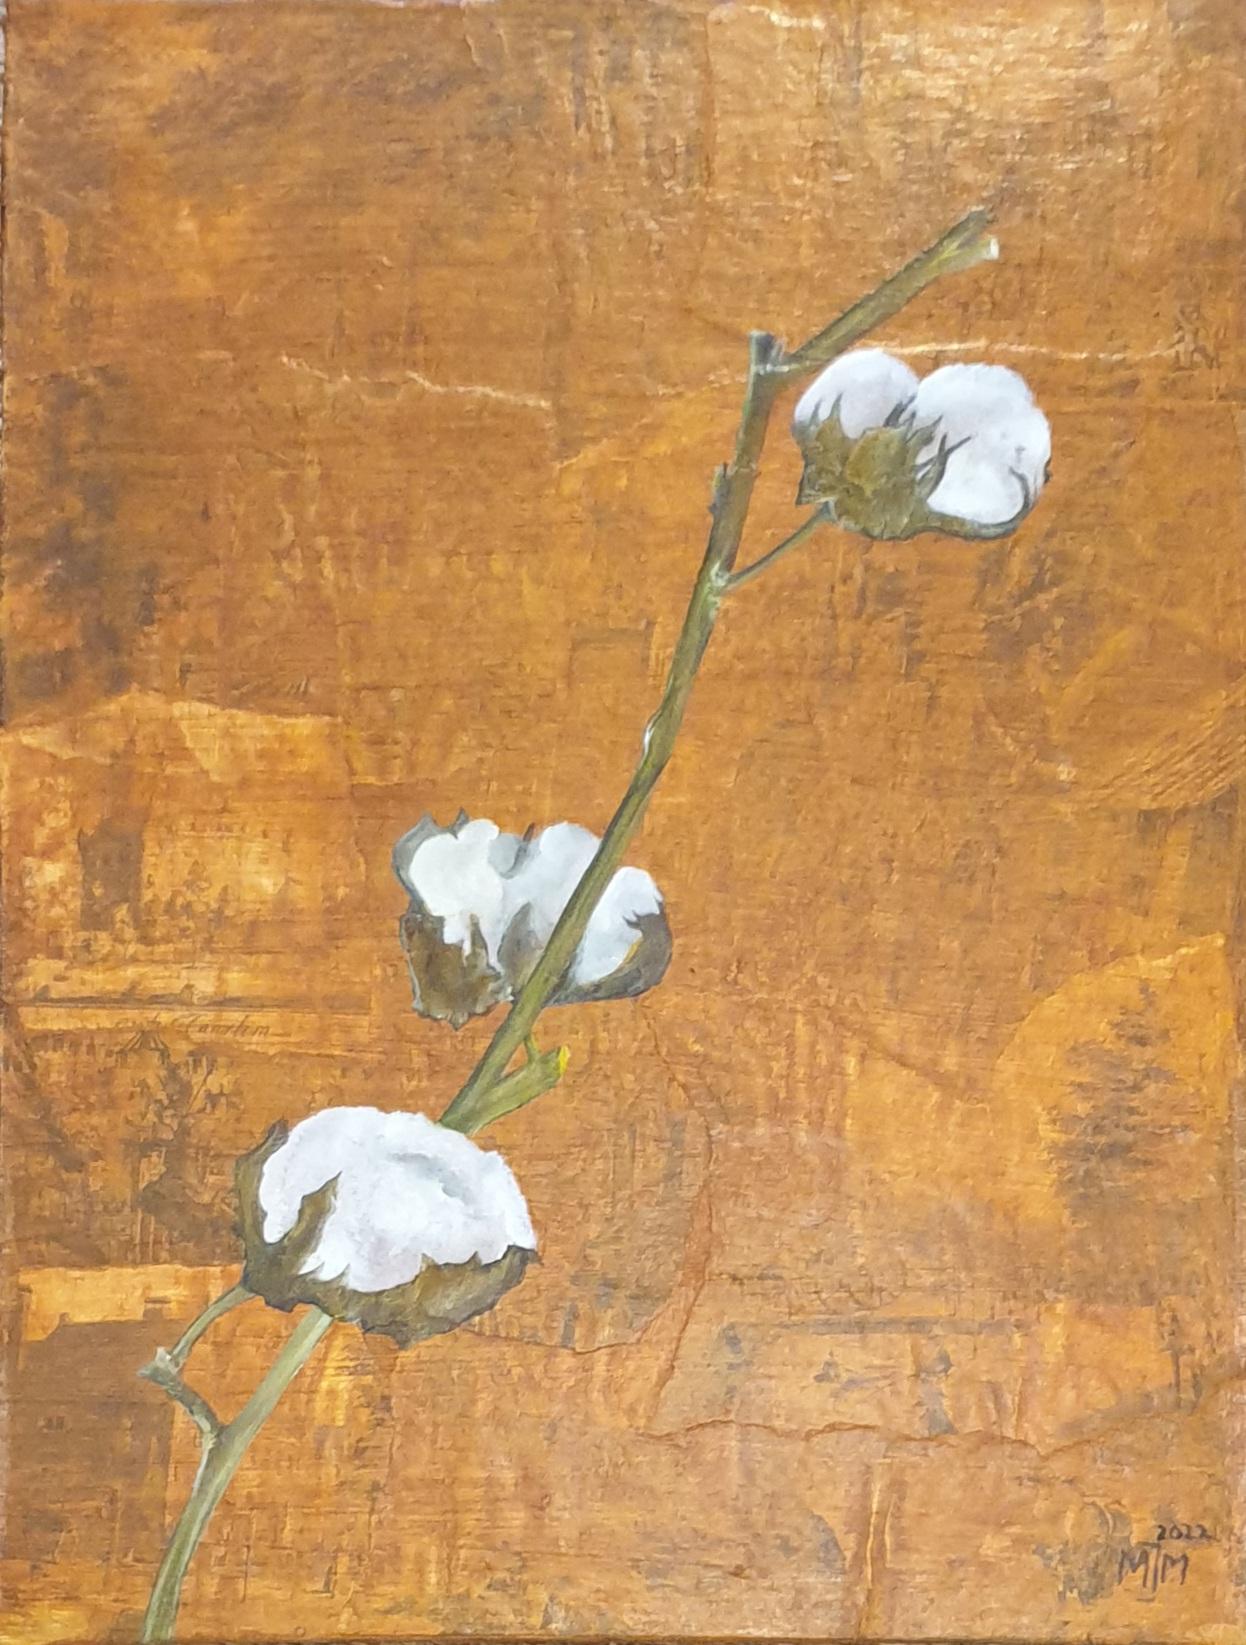 Cotton Ball. Contemporary Botanical Oil, Acrylic and découpage on Board. - Painting by Menno Modderman 